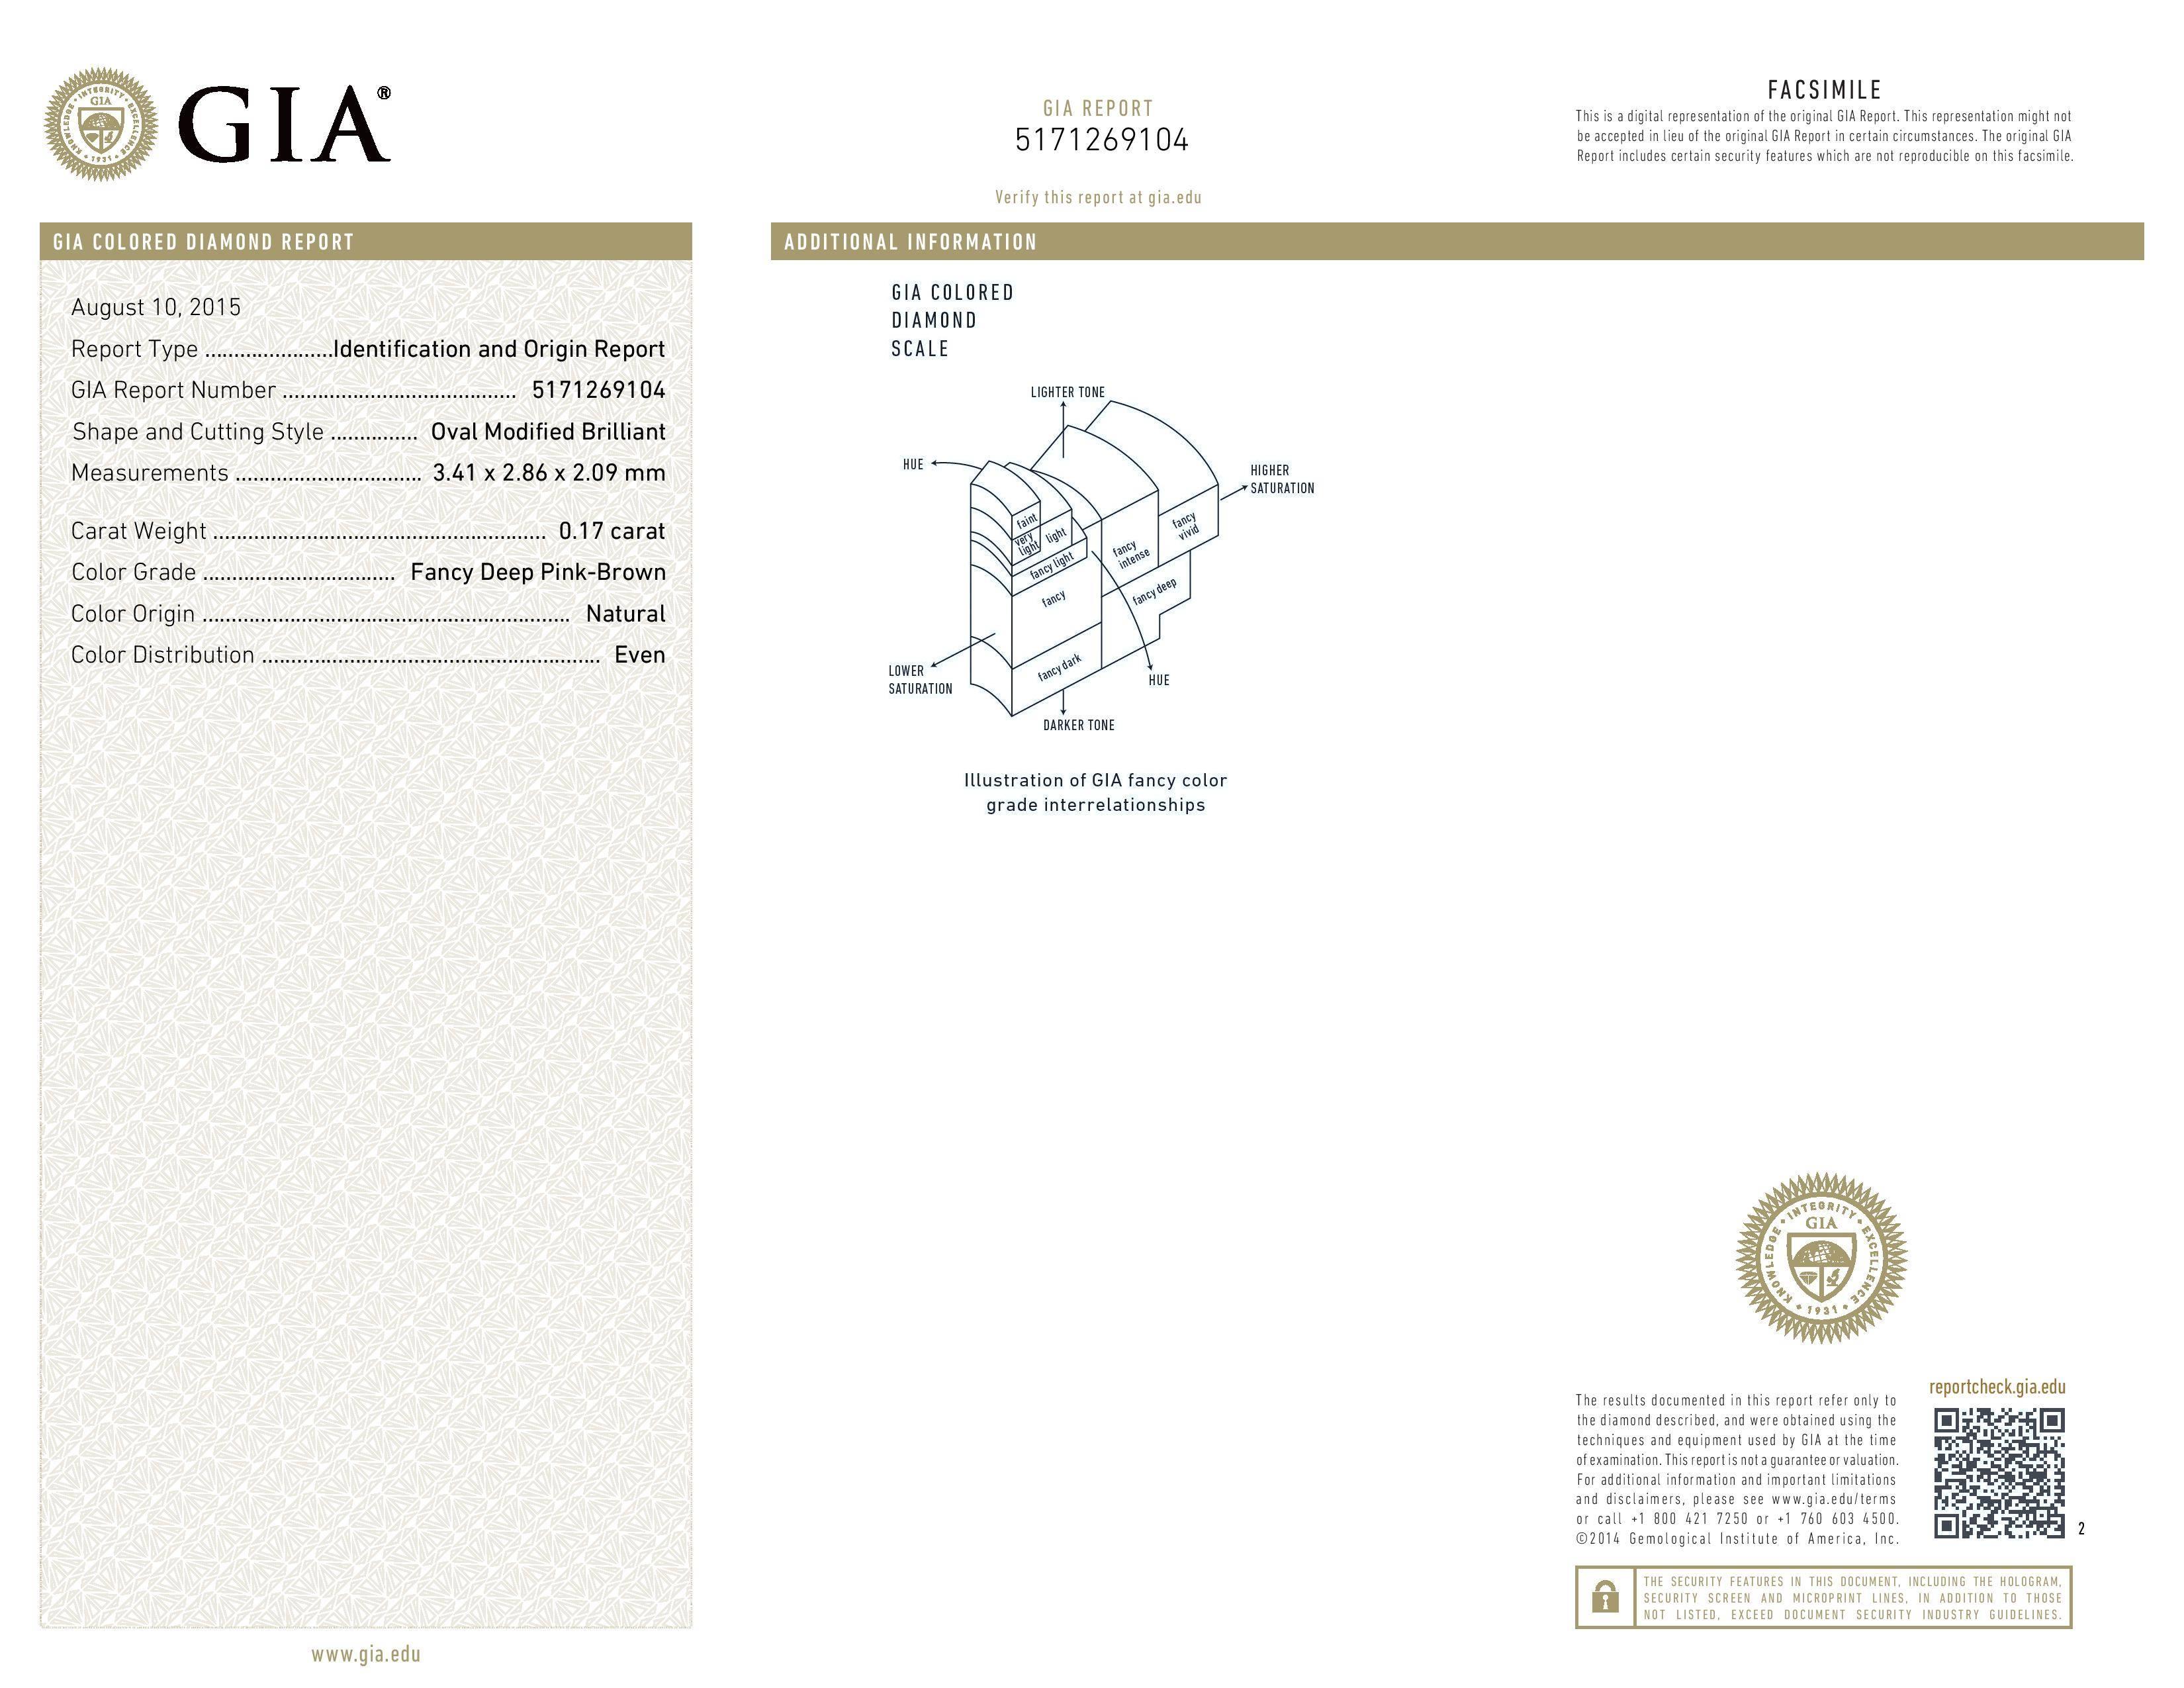 Gorgeous GIA certified 0.17ct fancy deep pink-brown, 18K white gold ring, surrounded by 0.86ct natural pink diamonds and 0.54ct G-H/VS round brilliant diamonds.
Size 6.5. Re-sizing is complimentary upon request.
GIA certificate attached.